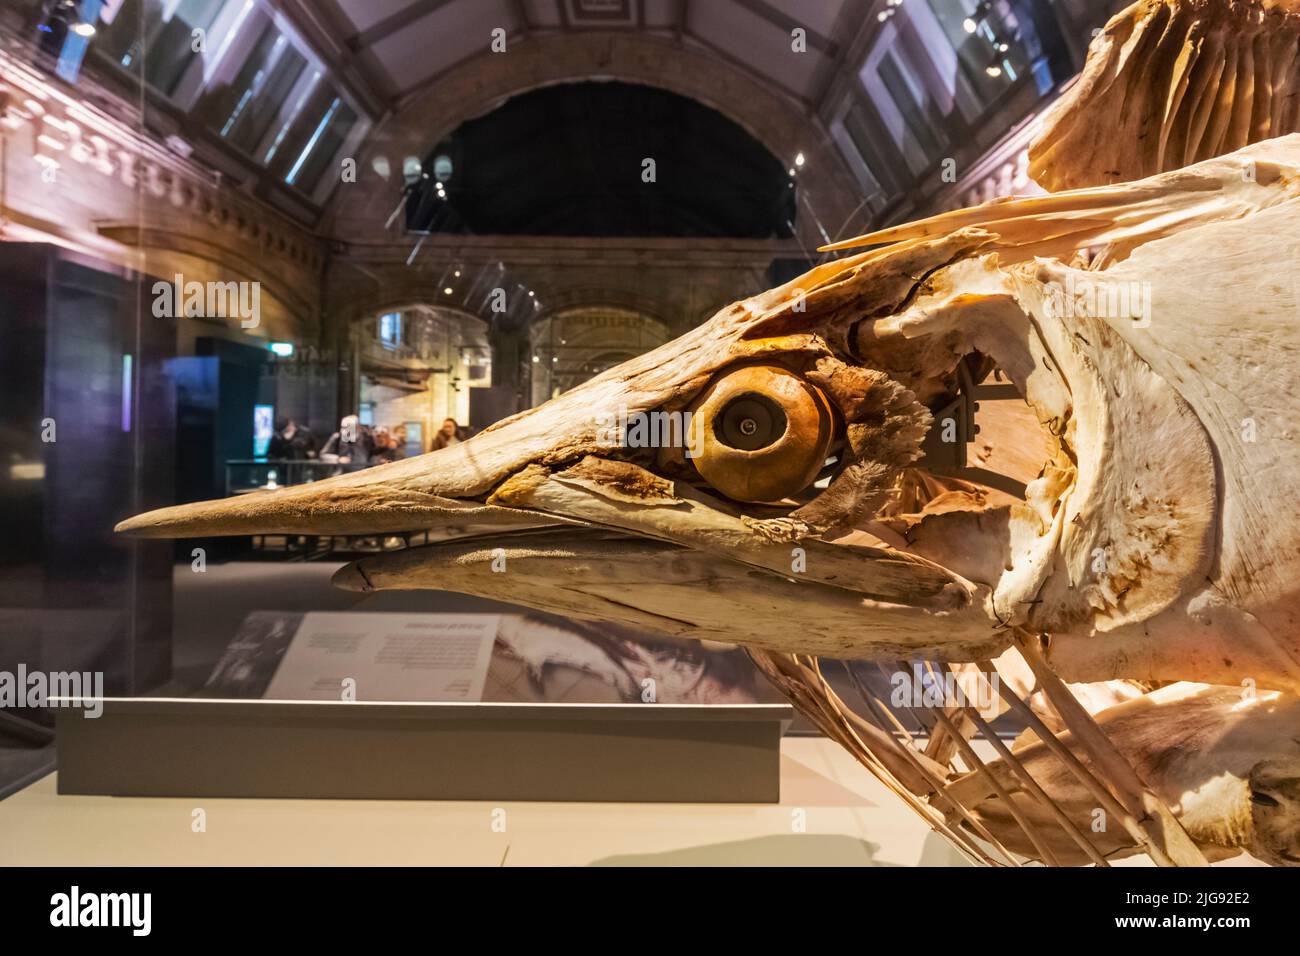 England, London, South Kensington, Natural History Museum, Exhibit of a Skeleton of a Black Marlin Fish Stock Photo